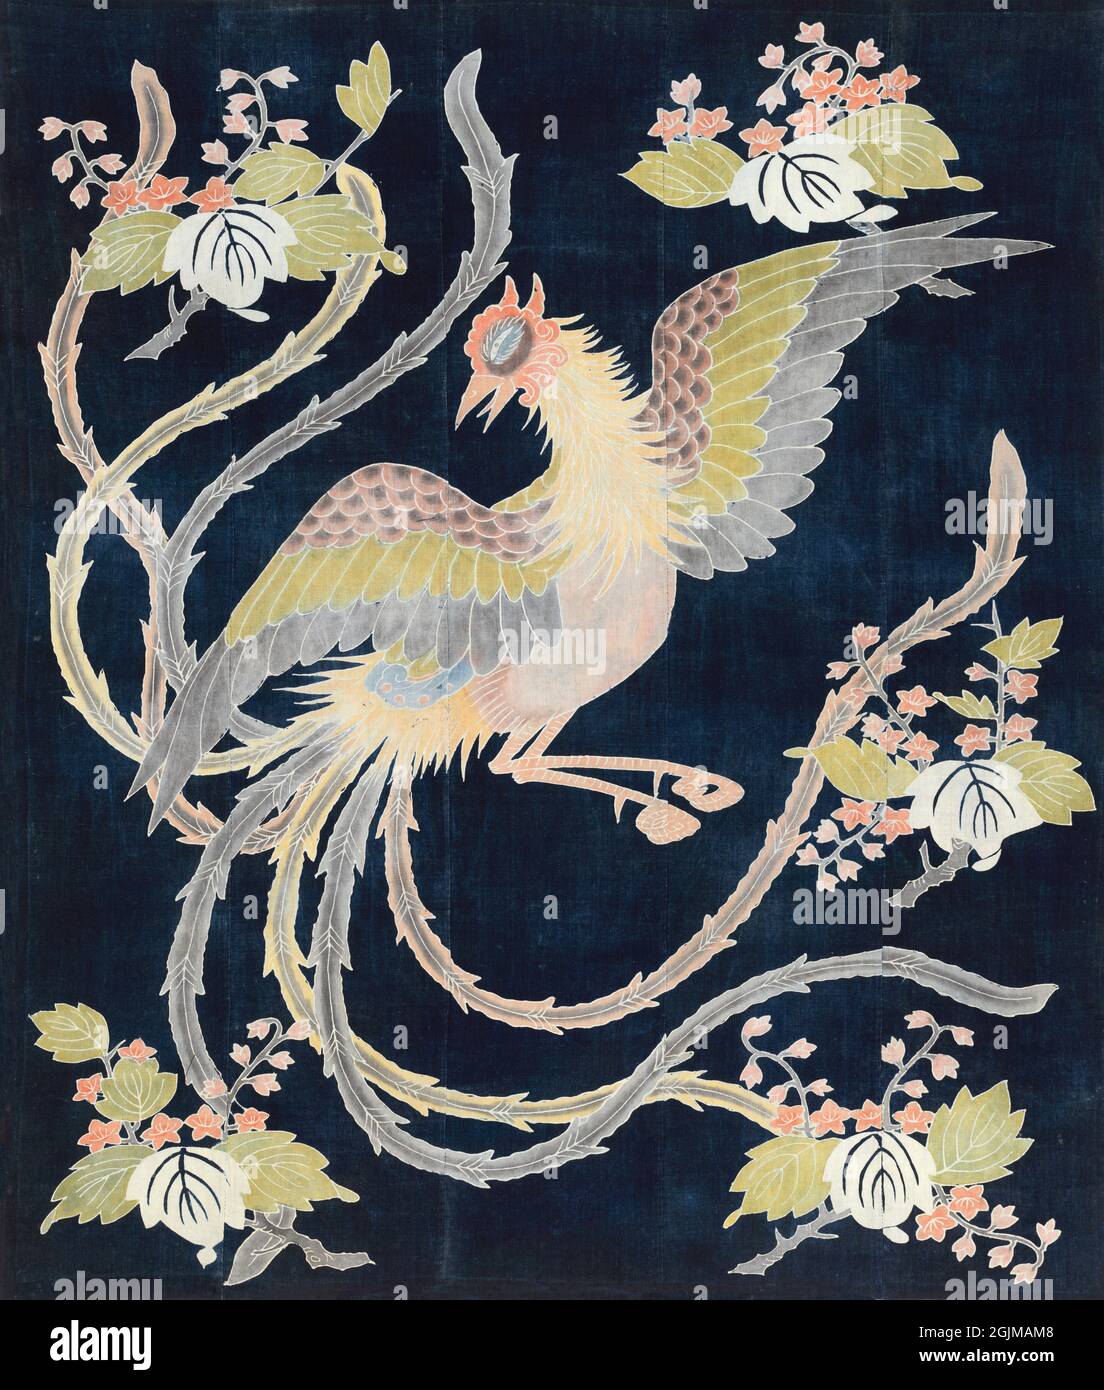 Early nineteenth century Japanese bedcover made from 5 panels. Indigo blue background.  Design depicts a large bird with widely-spread wings, long tail feathers, and foliage.  Hou-ou Bird and Paulownia Tree. JAPAN Stock Photo